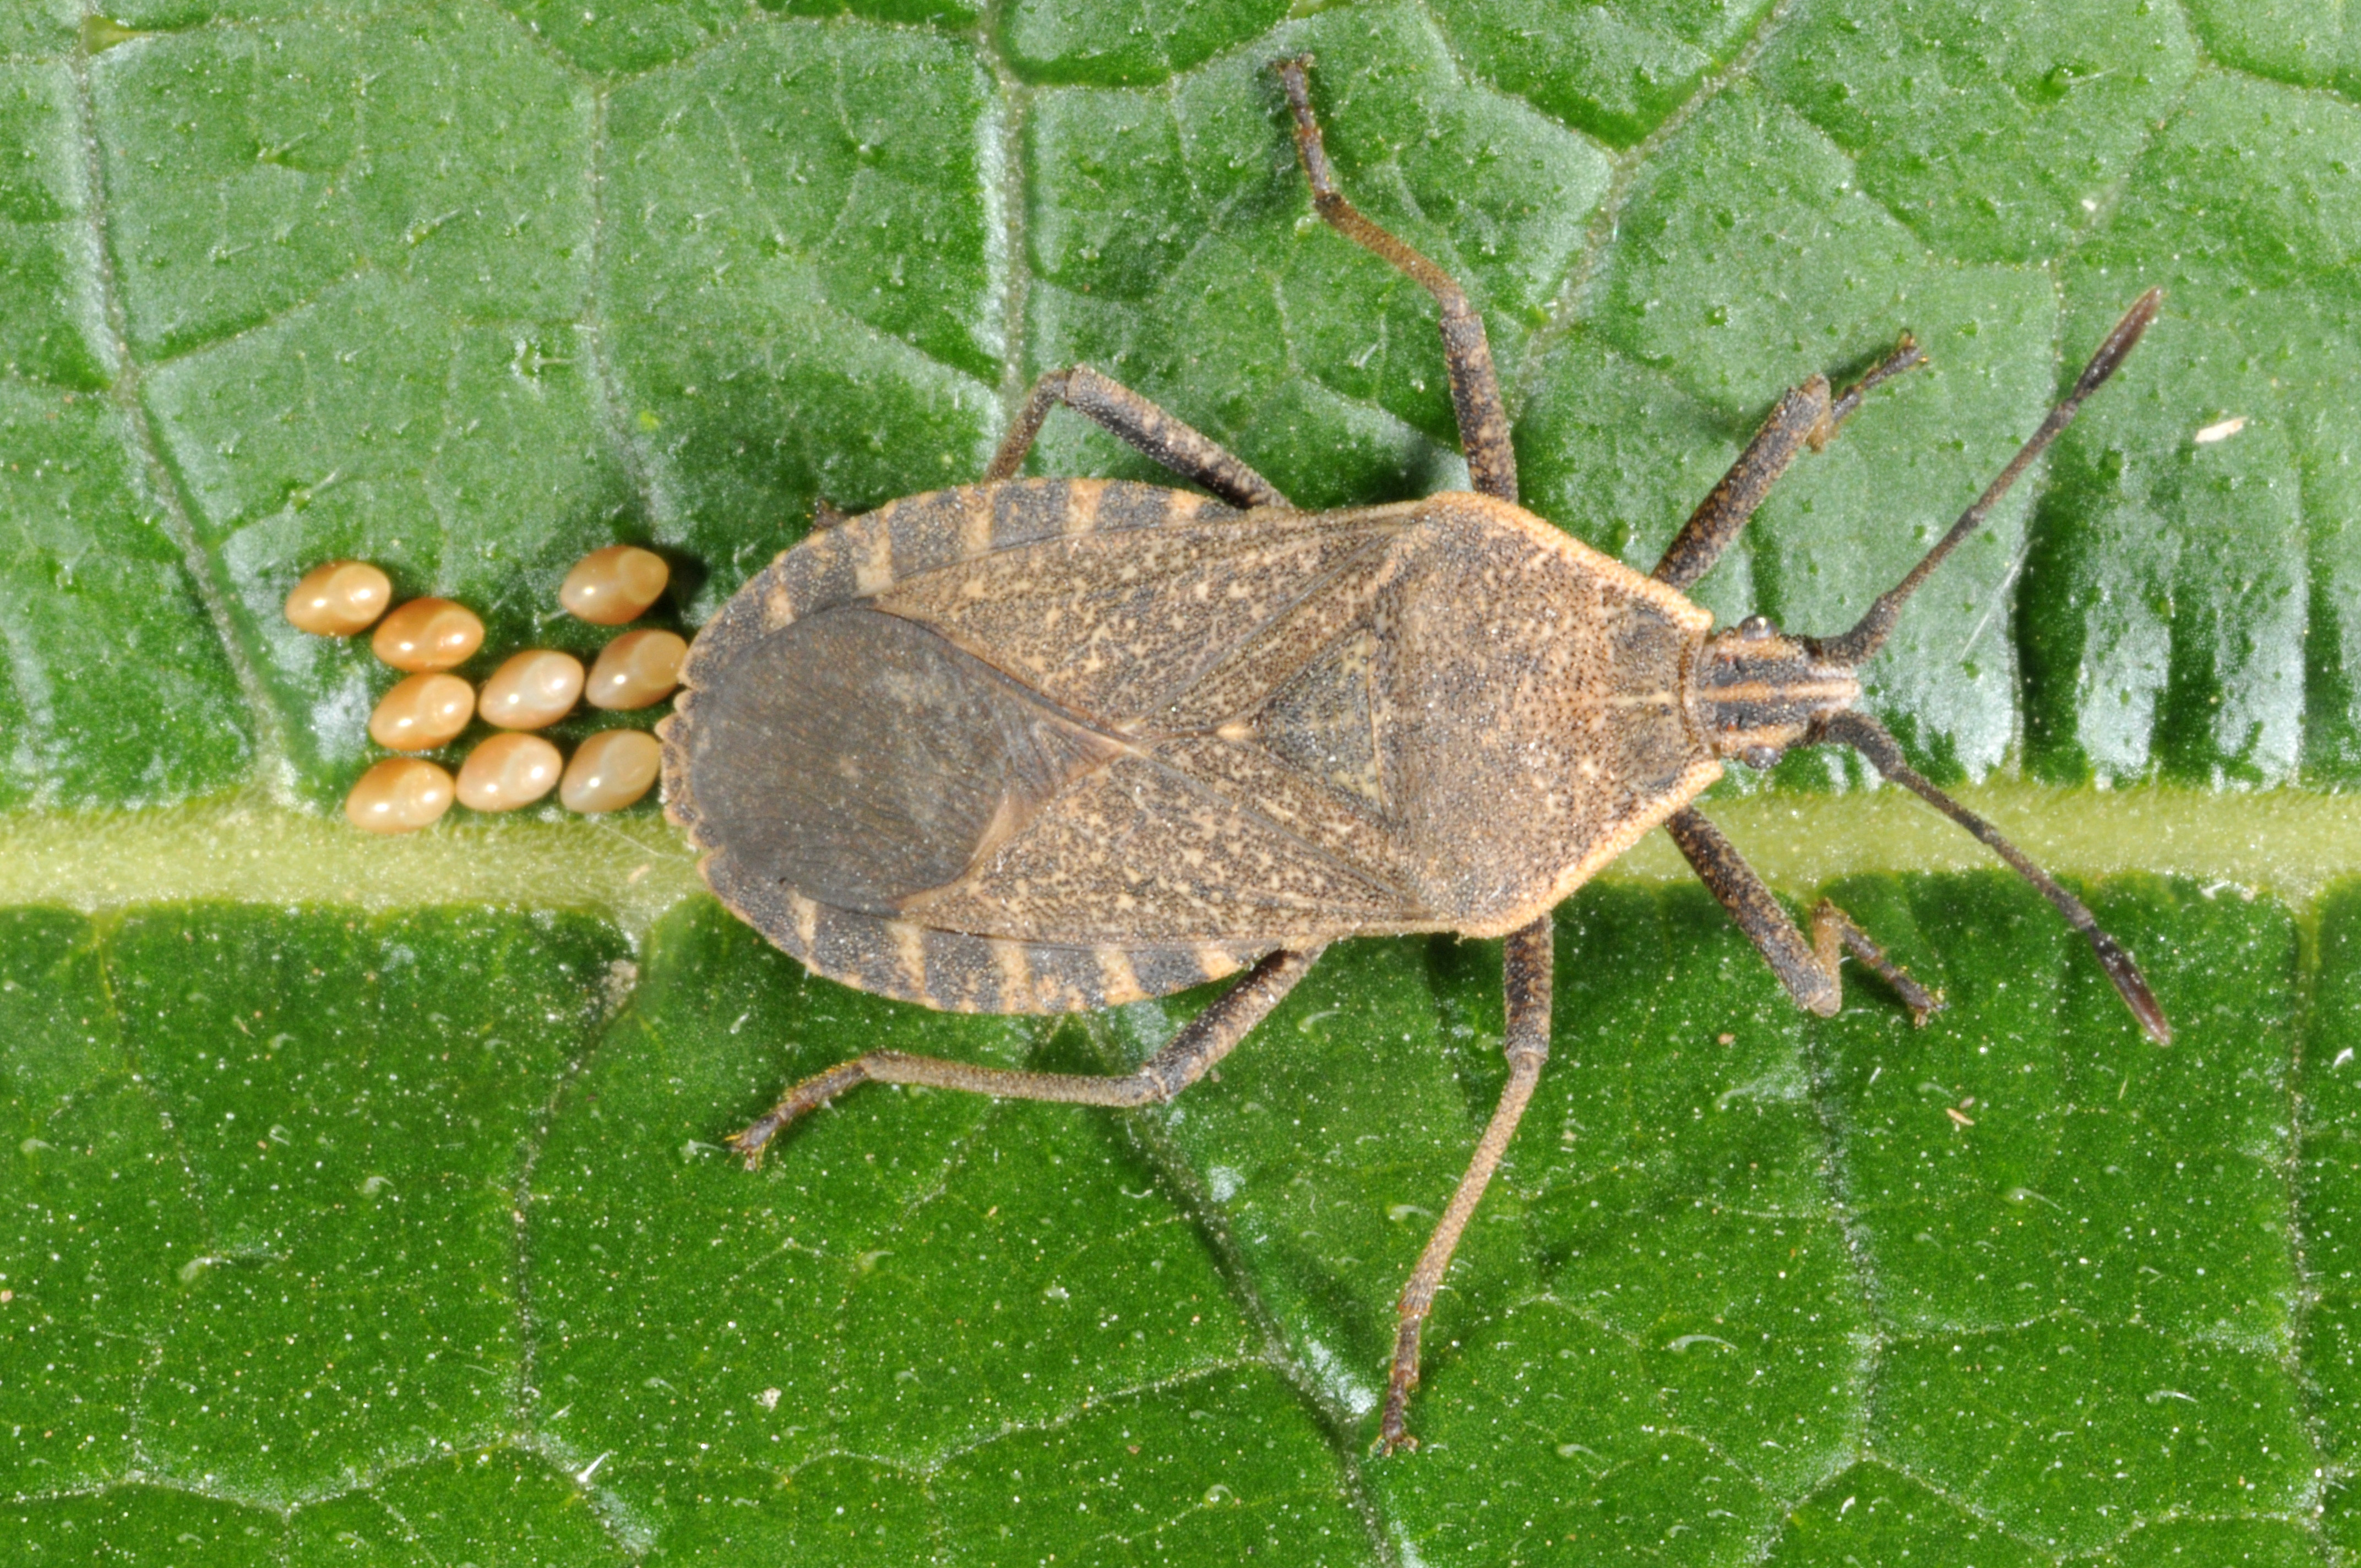 Squash adult and eggs (top) and early instar damage